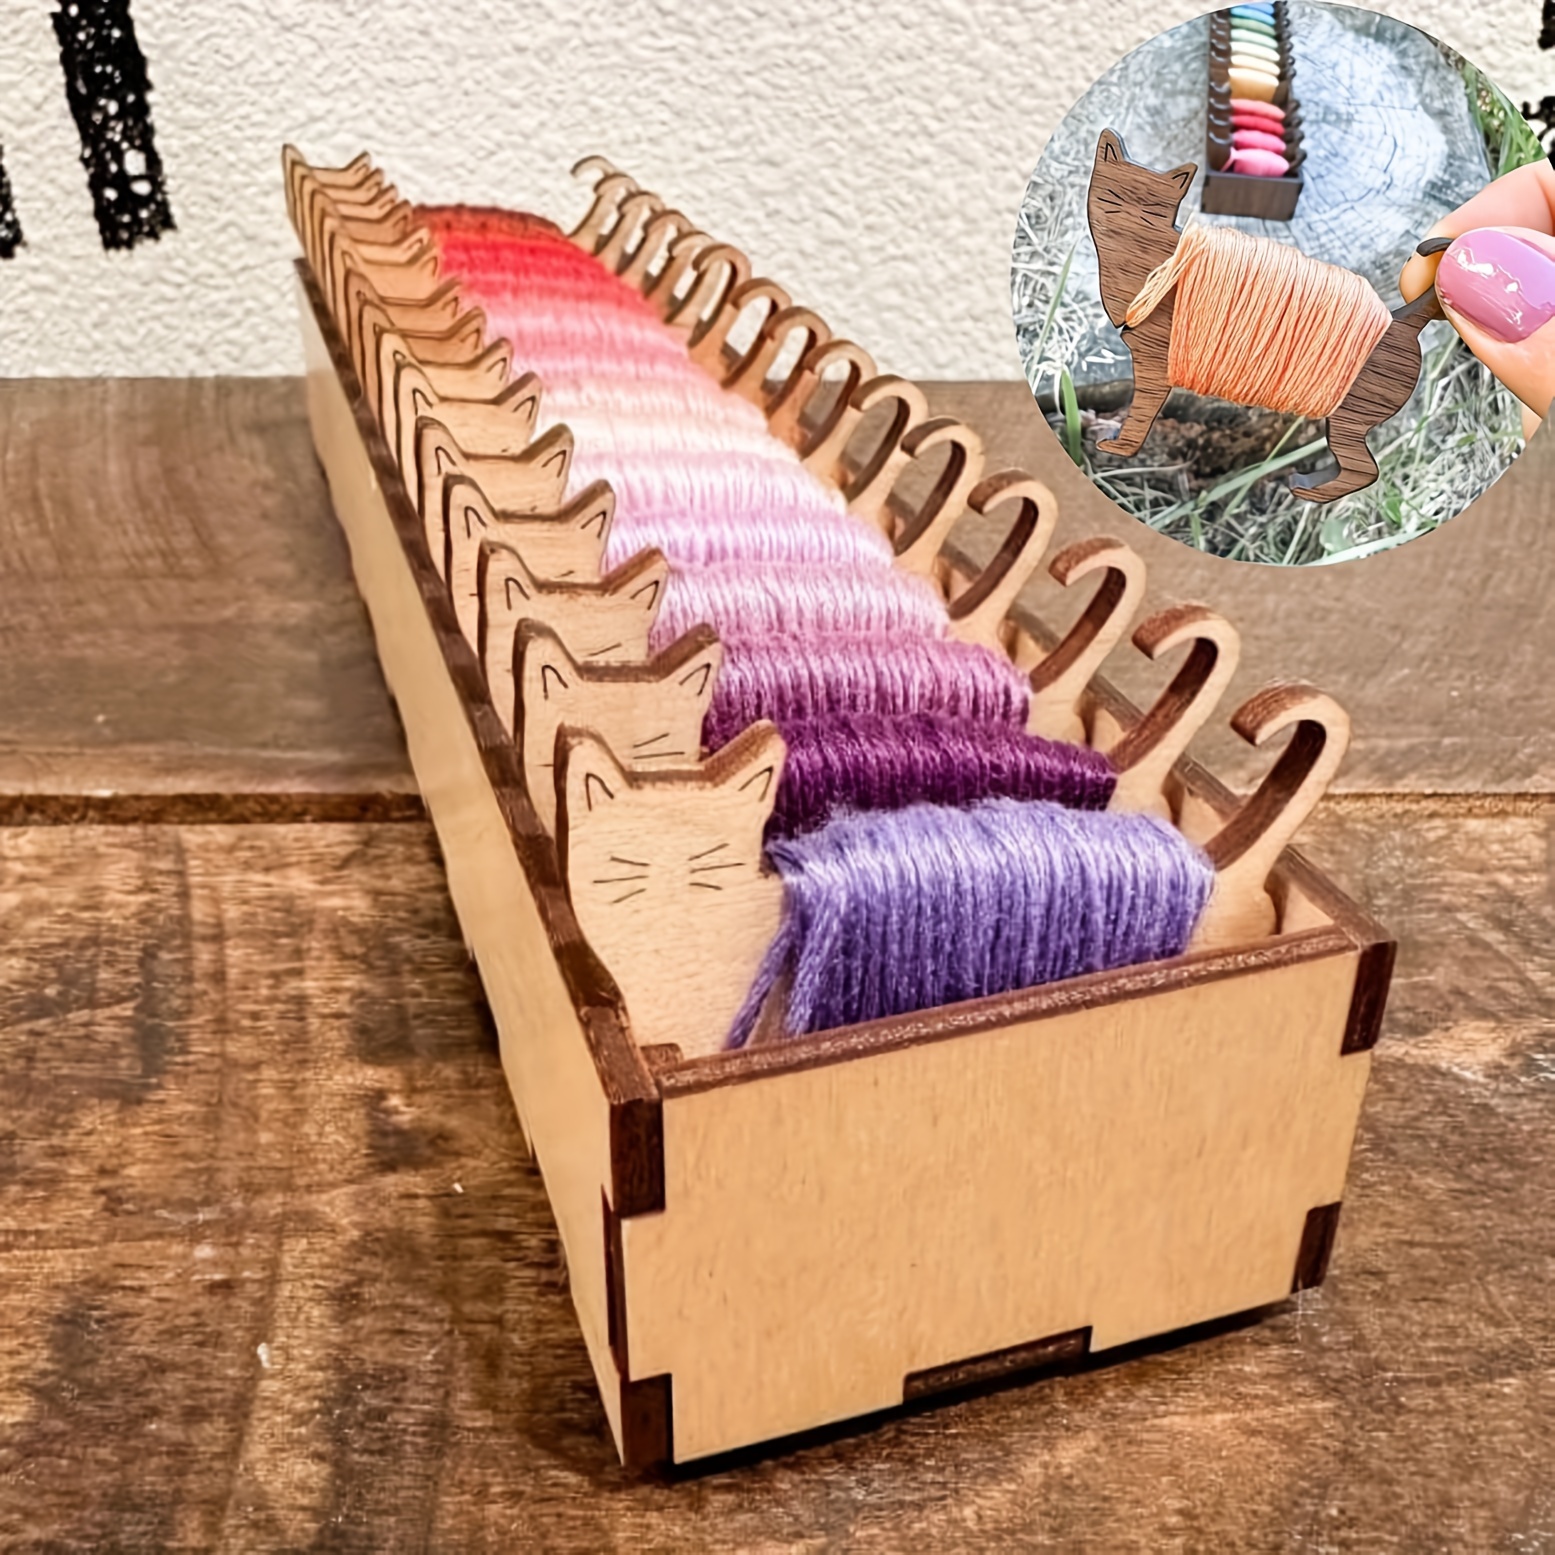 

Charming Wooden Cat Bobbin Organizer Set - Embroidery Floss & Thread Holder, Sewing Storage Solution (assorted Colors)